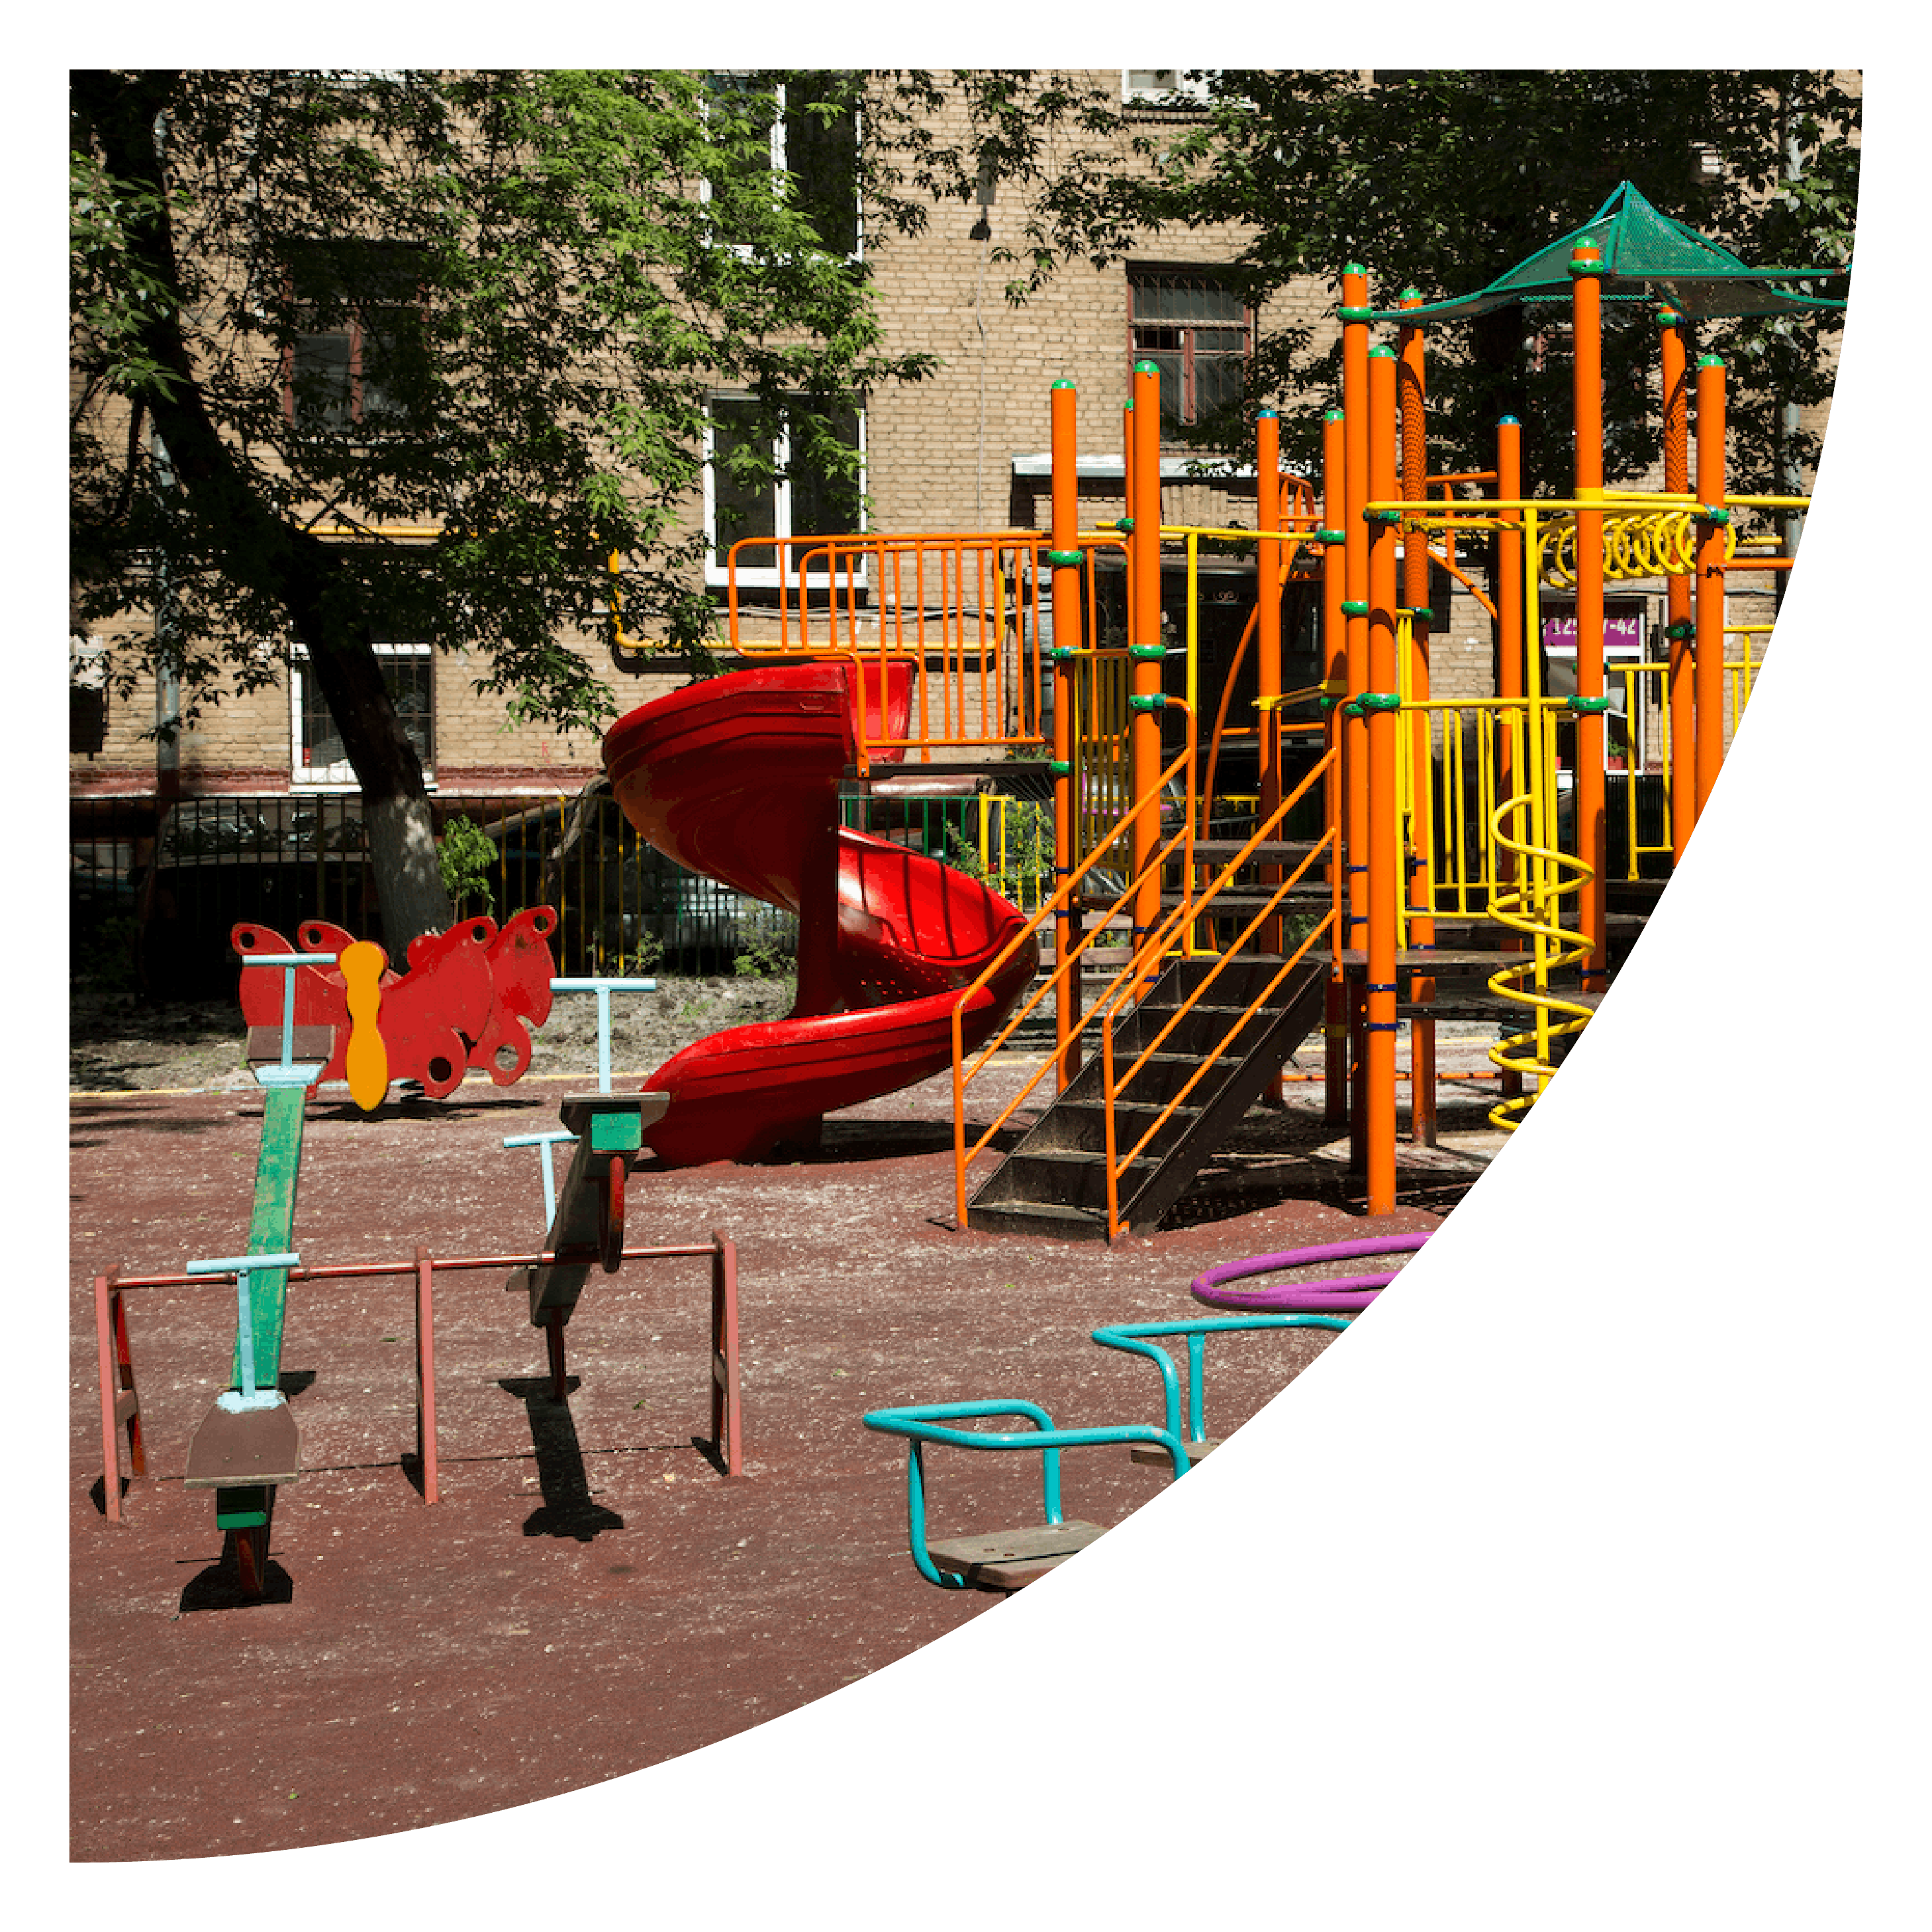 A colorful playground with lots of equipment